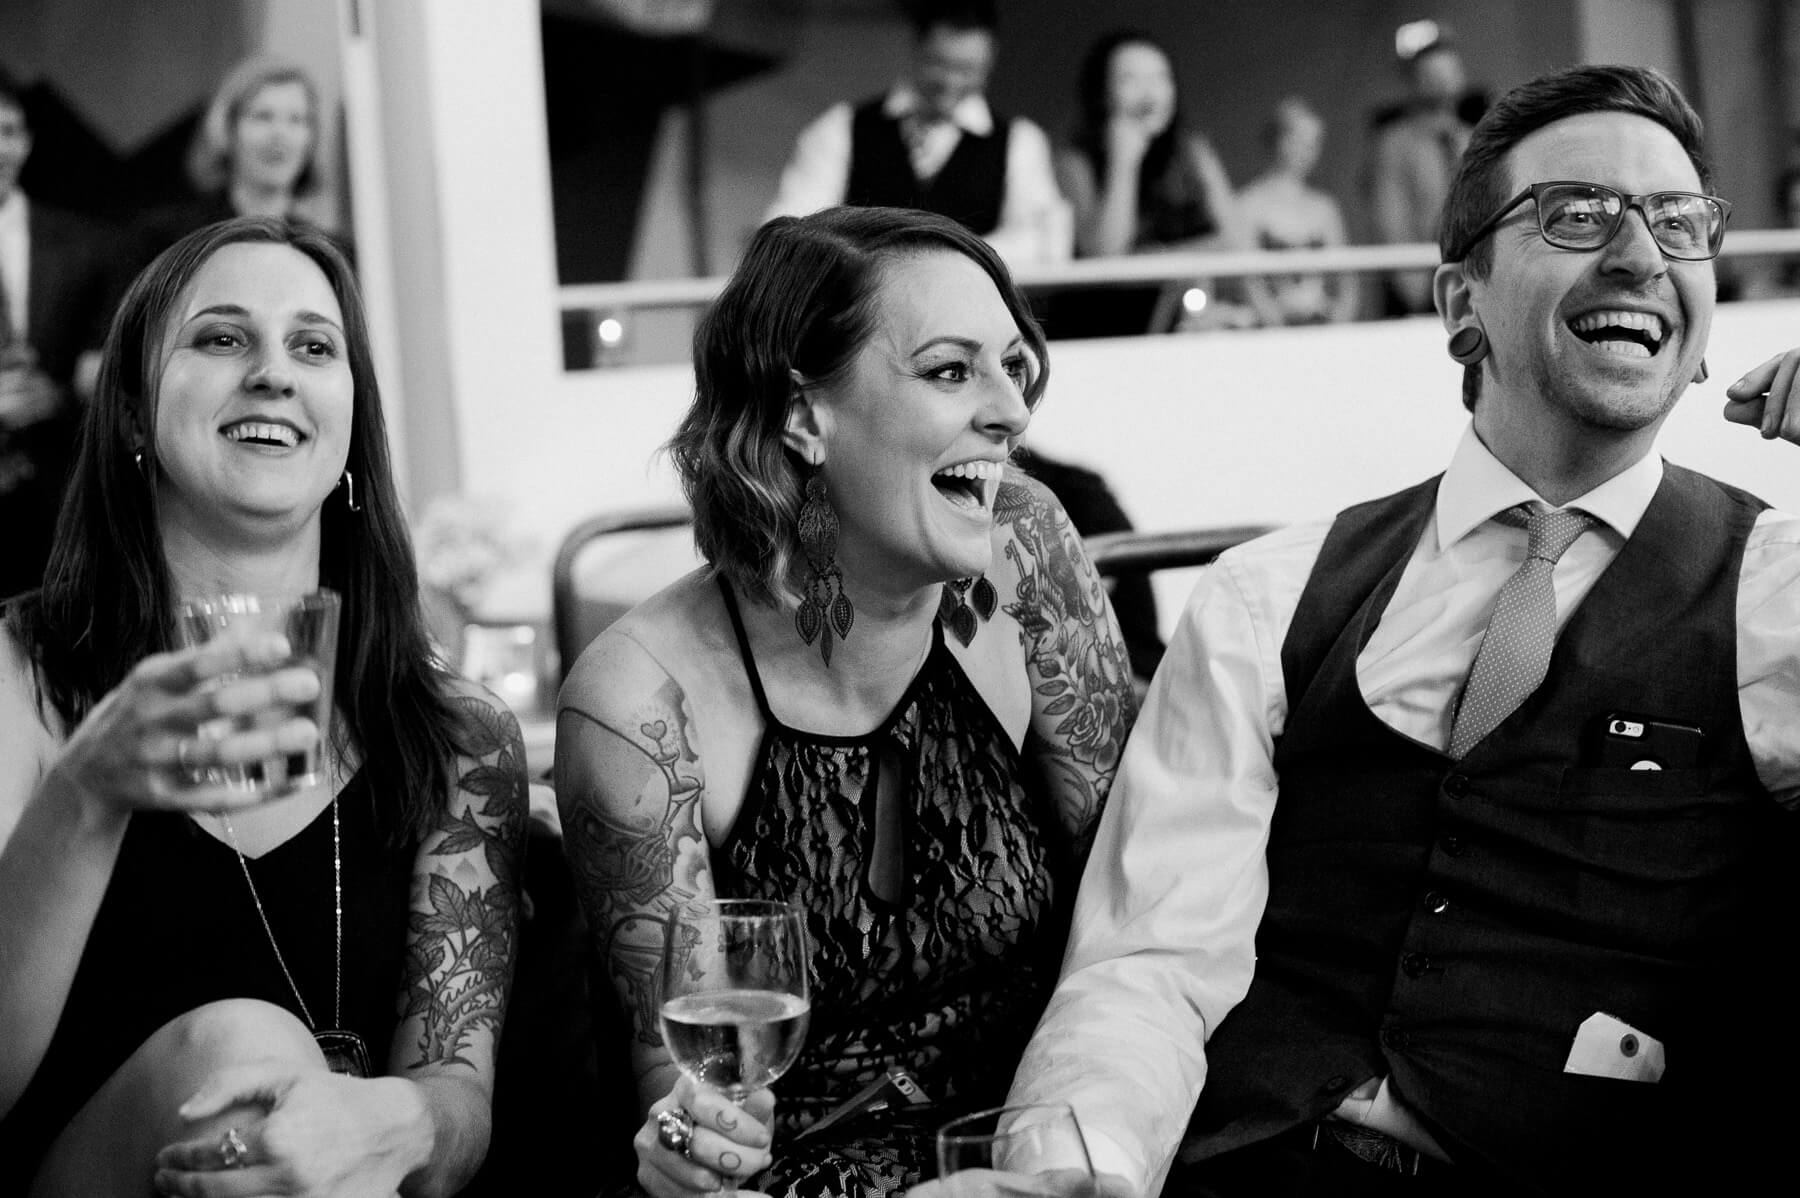 Wedding guests enjoy themselves at a Portland Holocene event. Photography by Briana Morrison